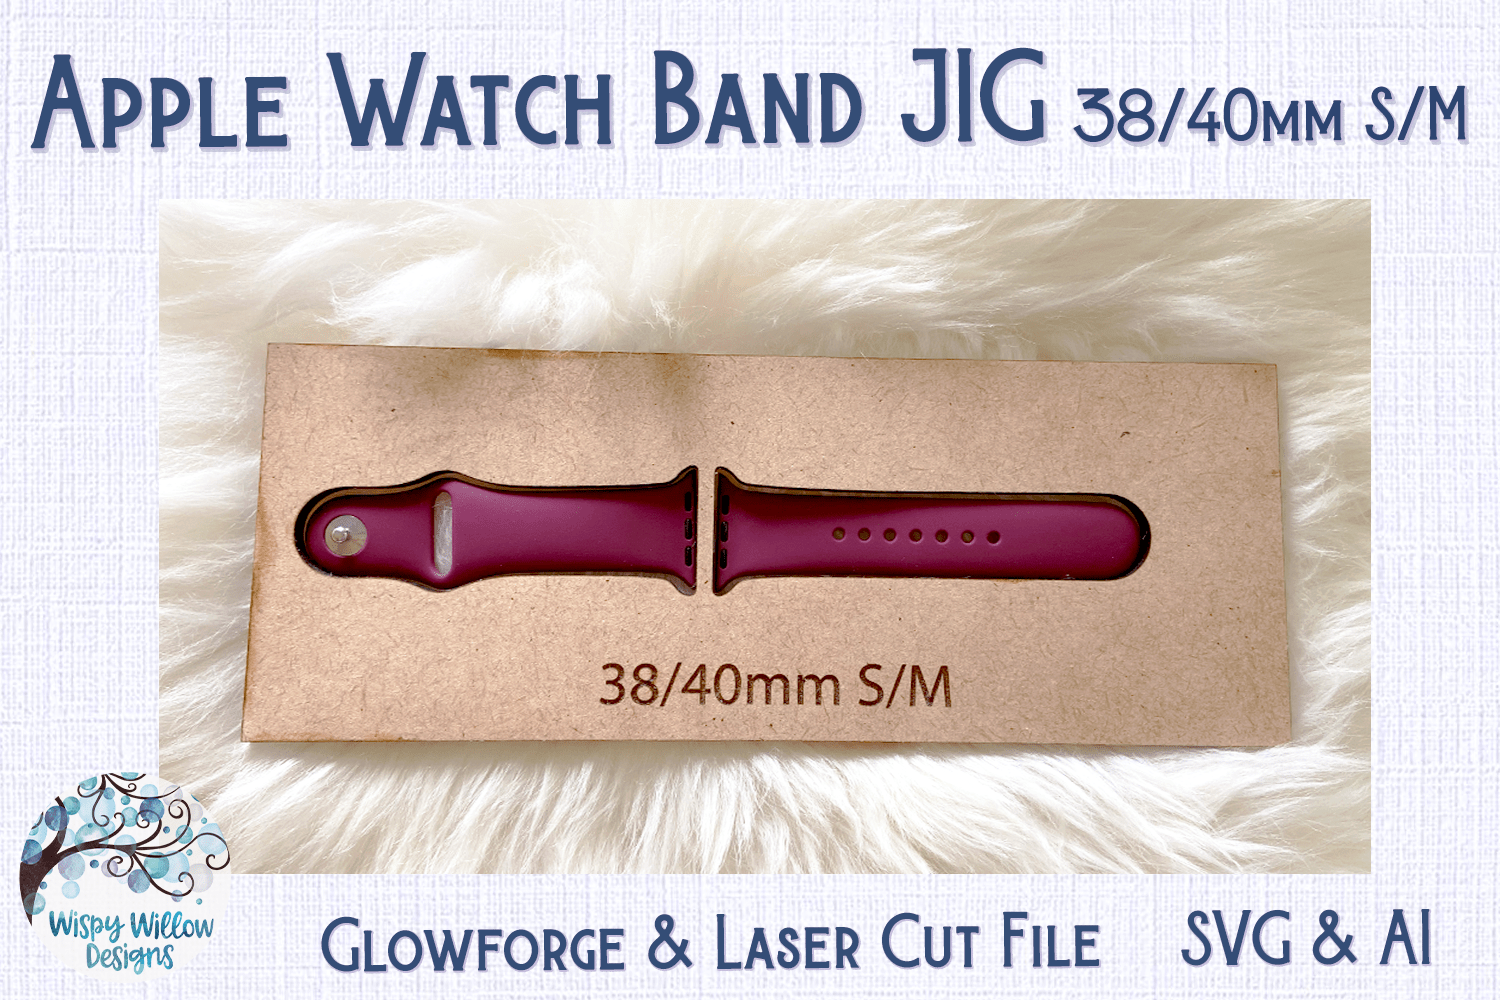 Watch Band Jig 38 40 S/M for Glowforge or Laser Cutter Wispy Willow Designs Company